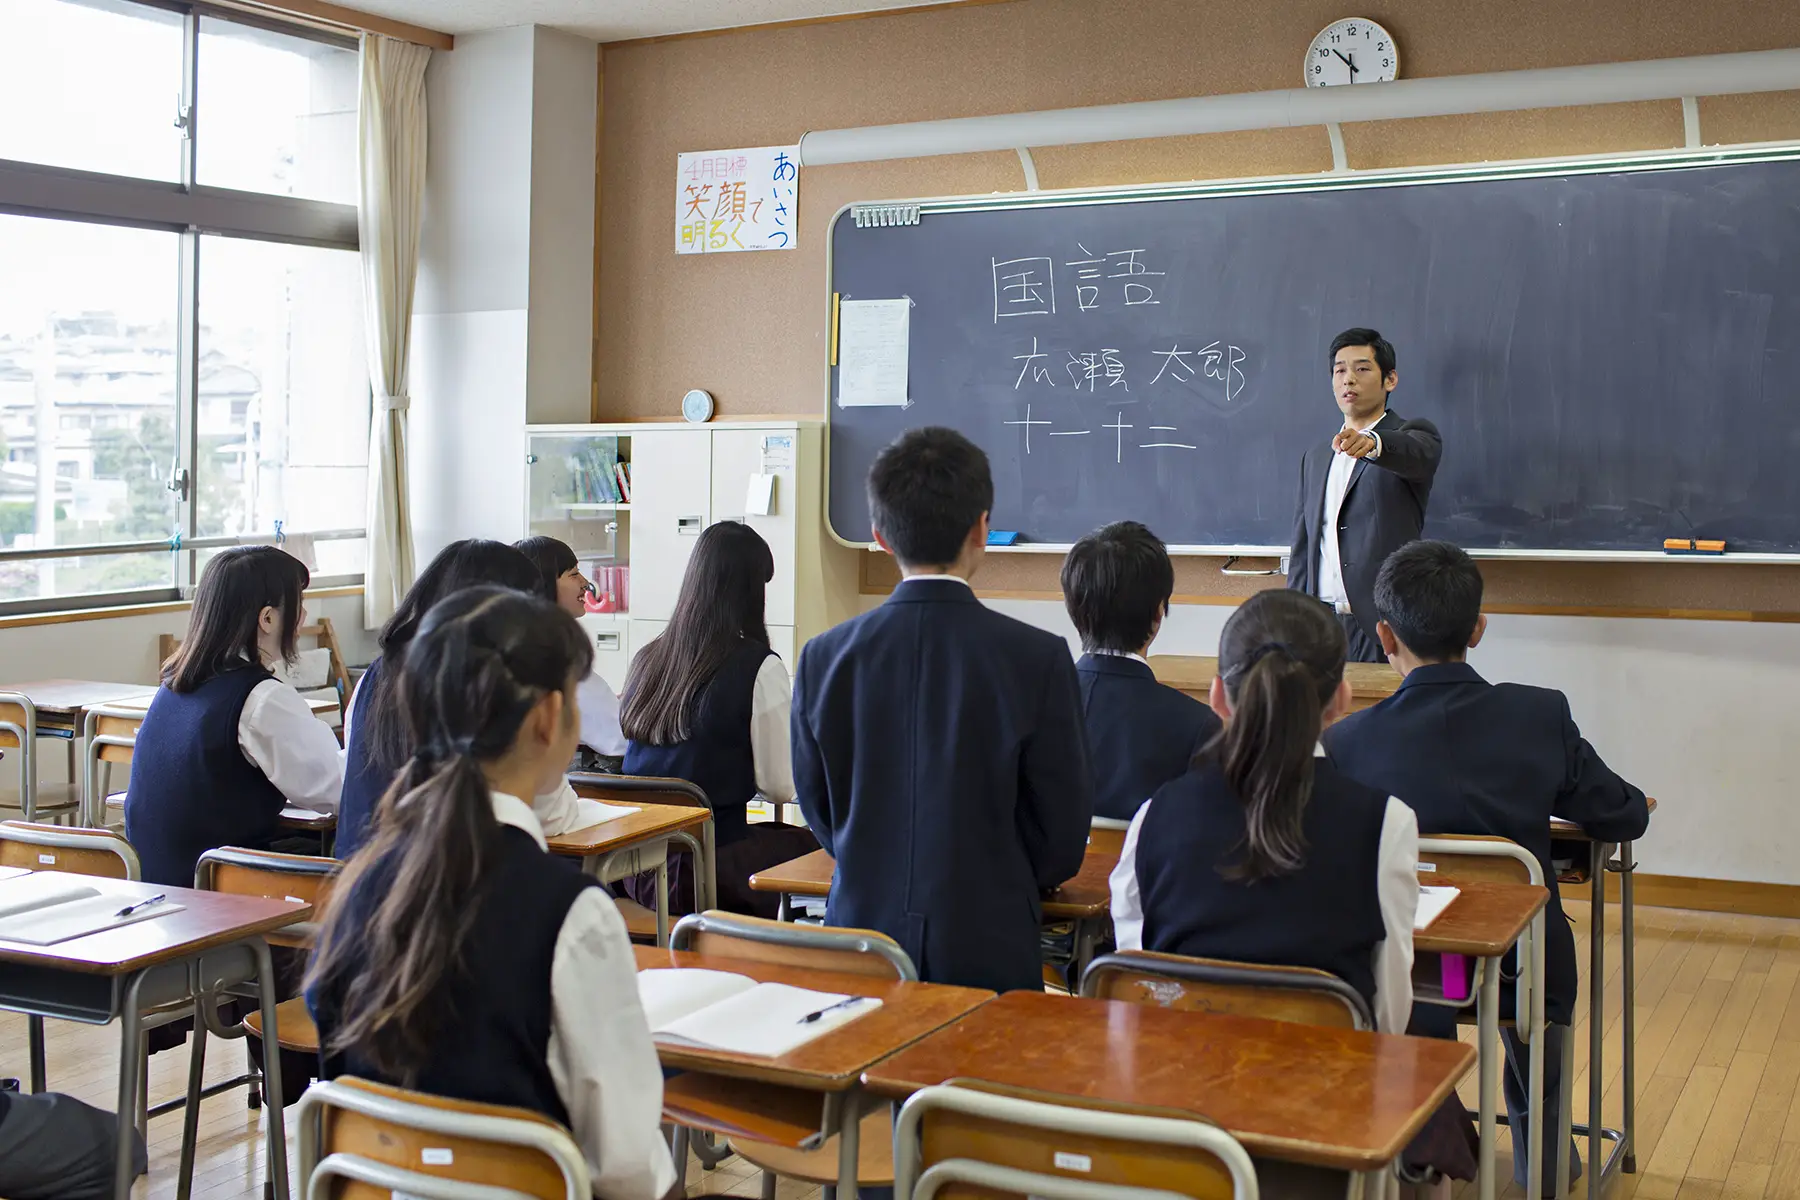 A teacher standing in front of a high school class answering student questions in Japan